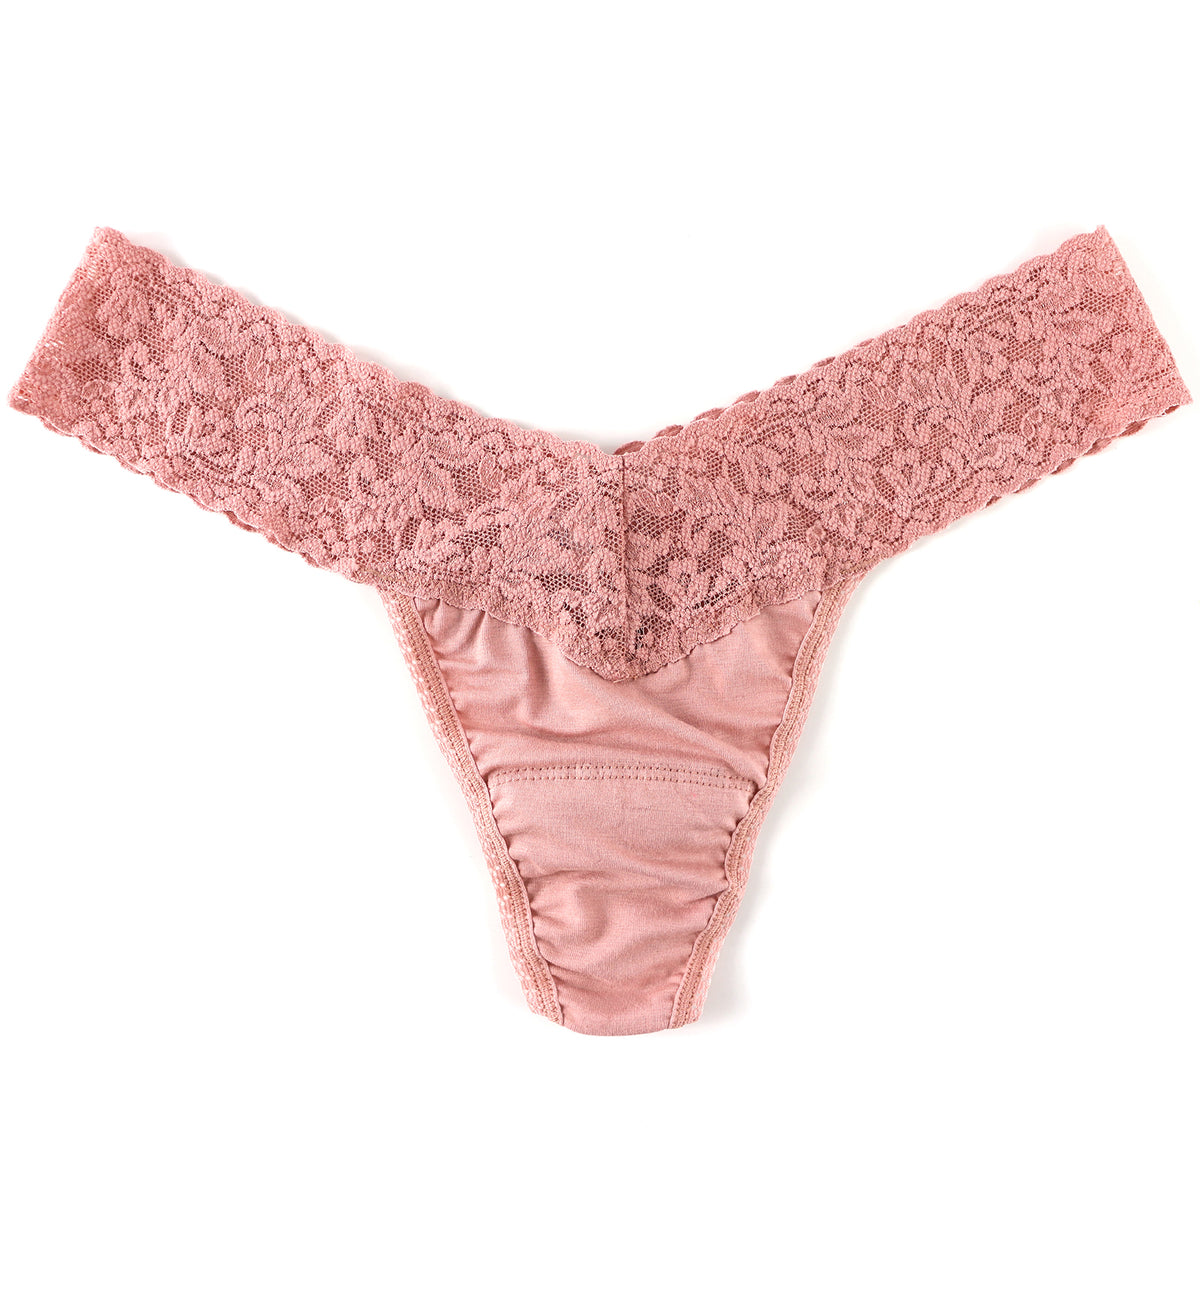 Hanky Panky Cotton Low Rise Thong (891581P),Rooibos - Rooibos,One Size